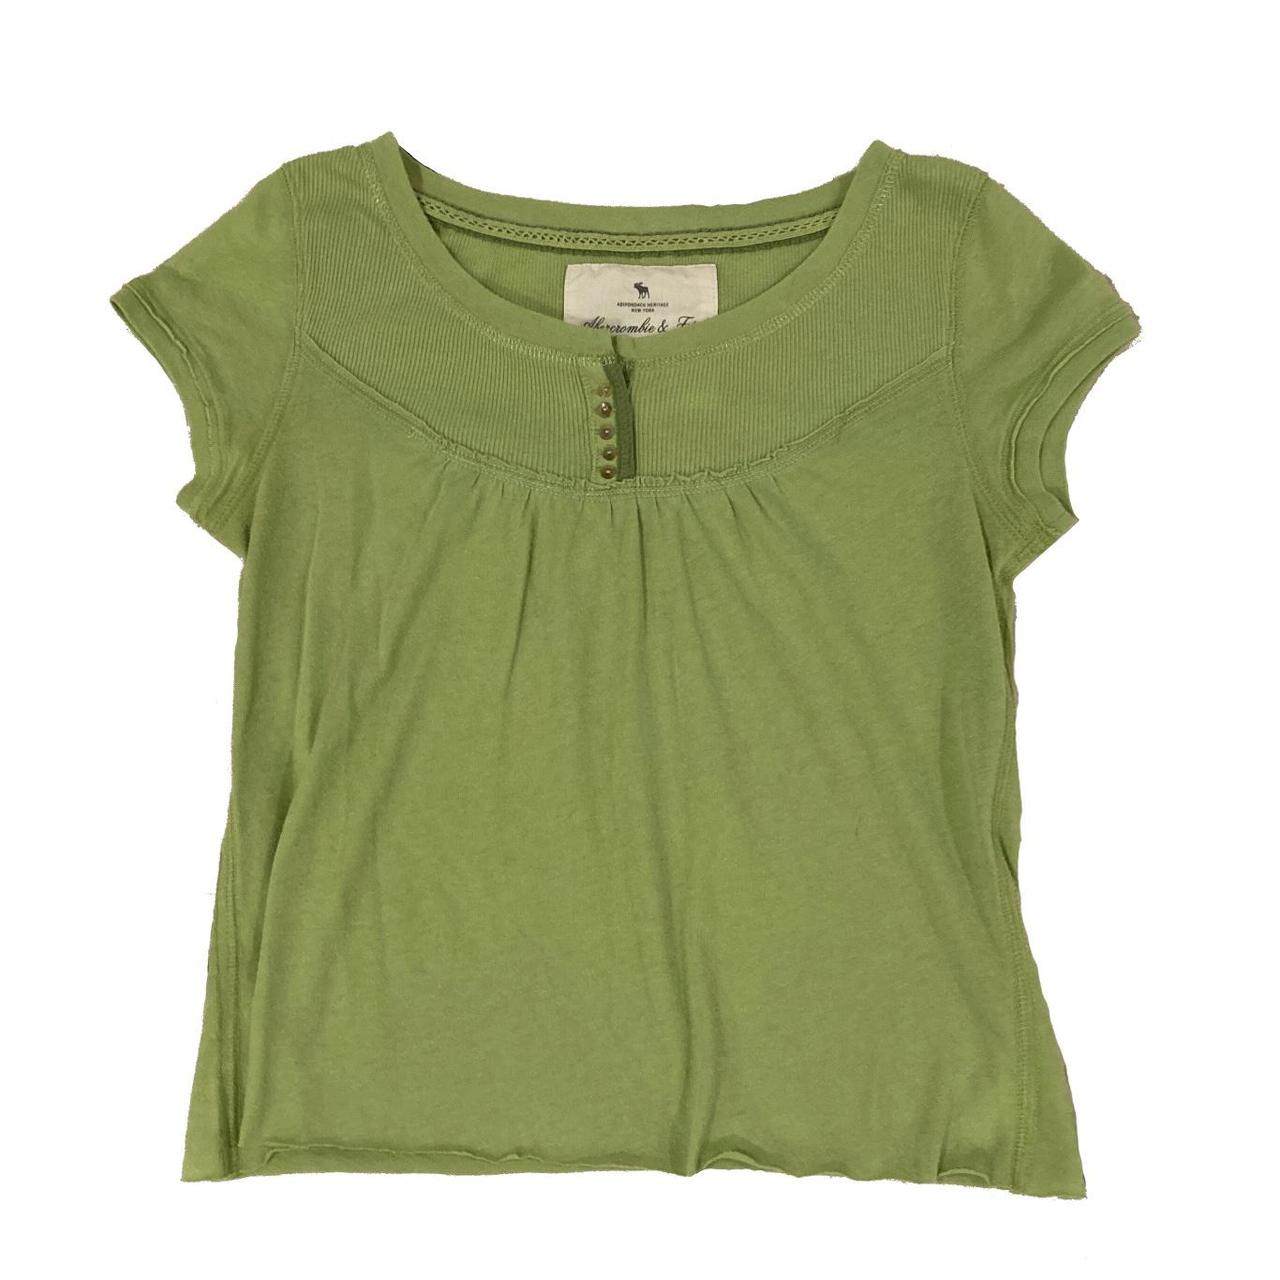 Product Image 1 - Abercrombie and Fitch green crop